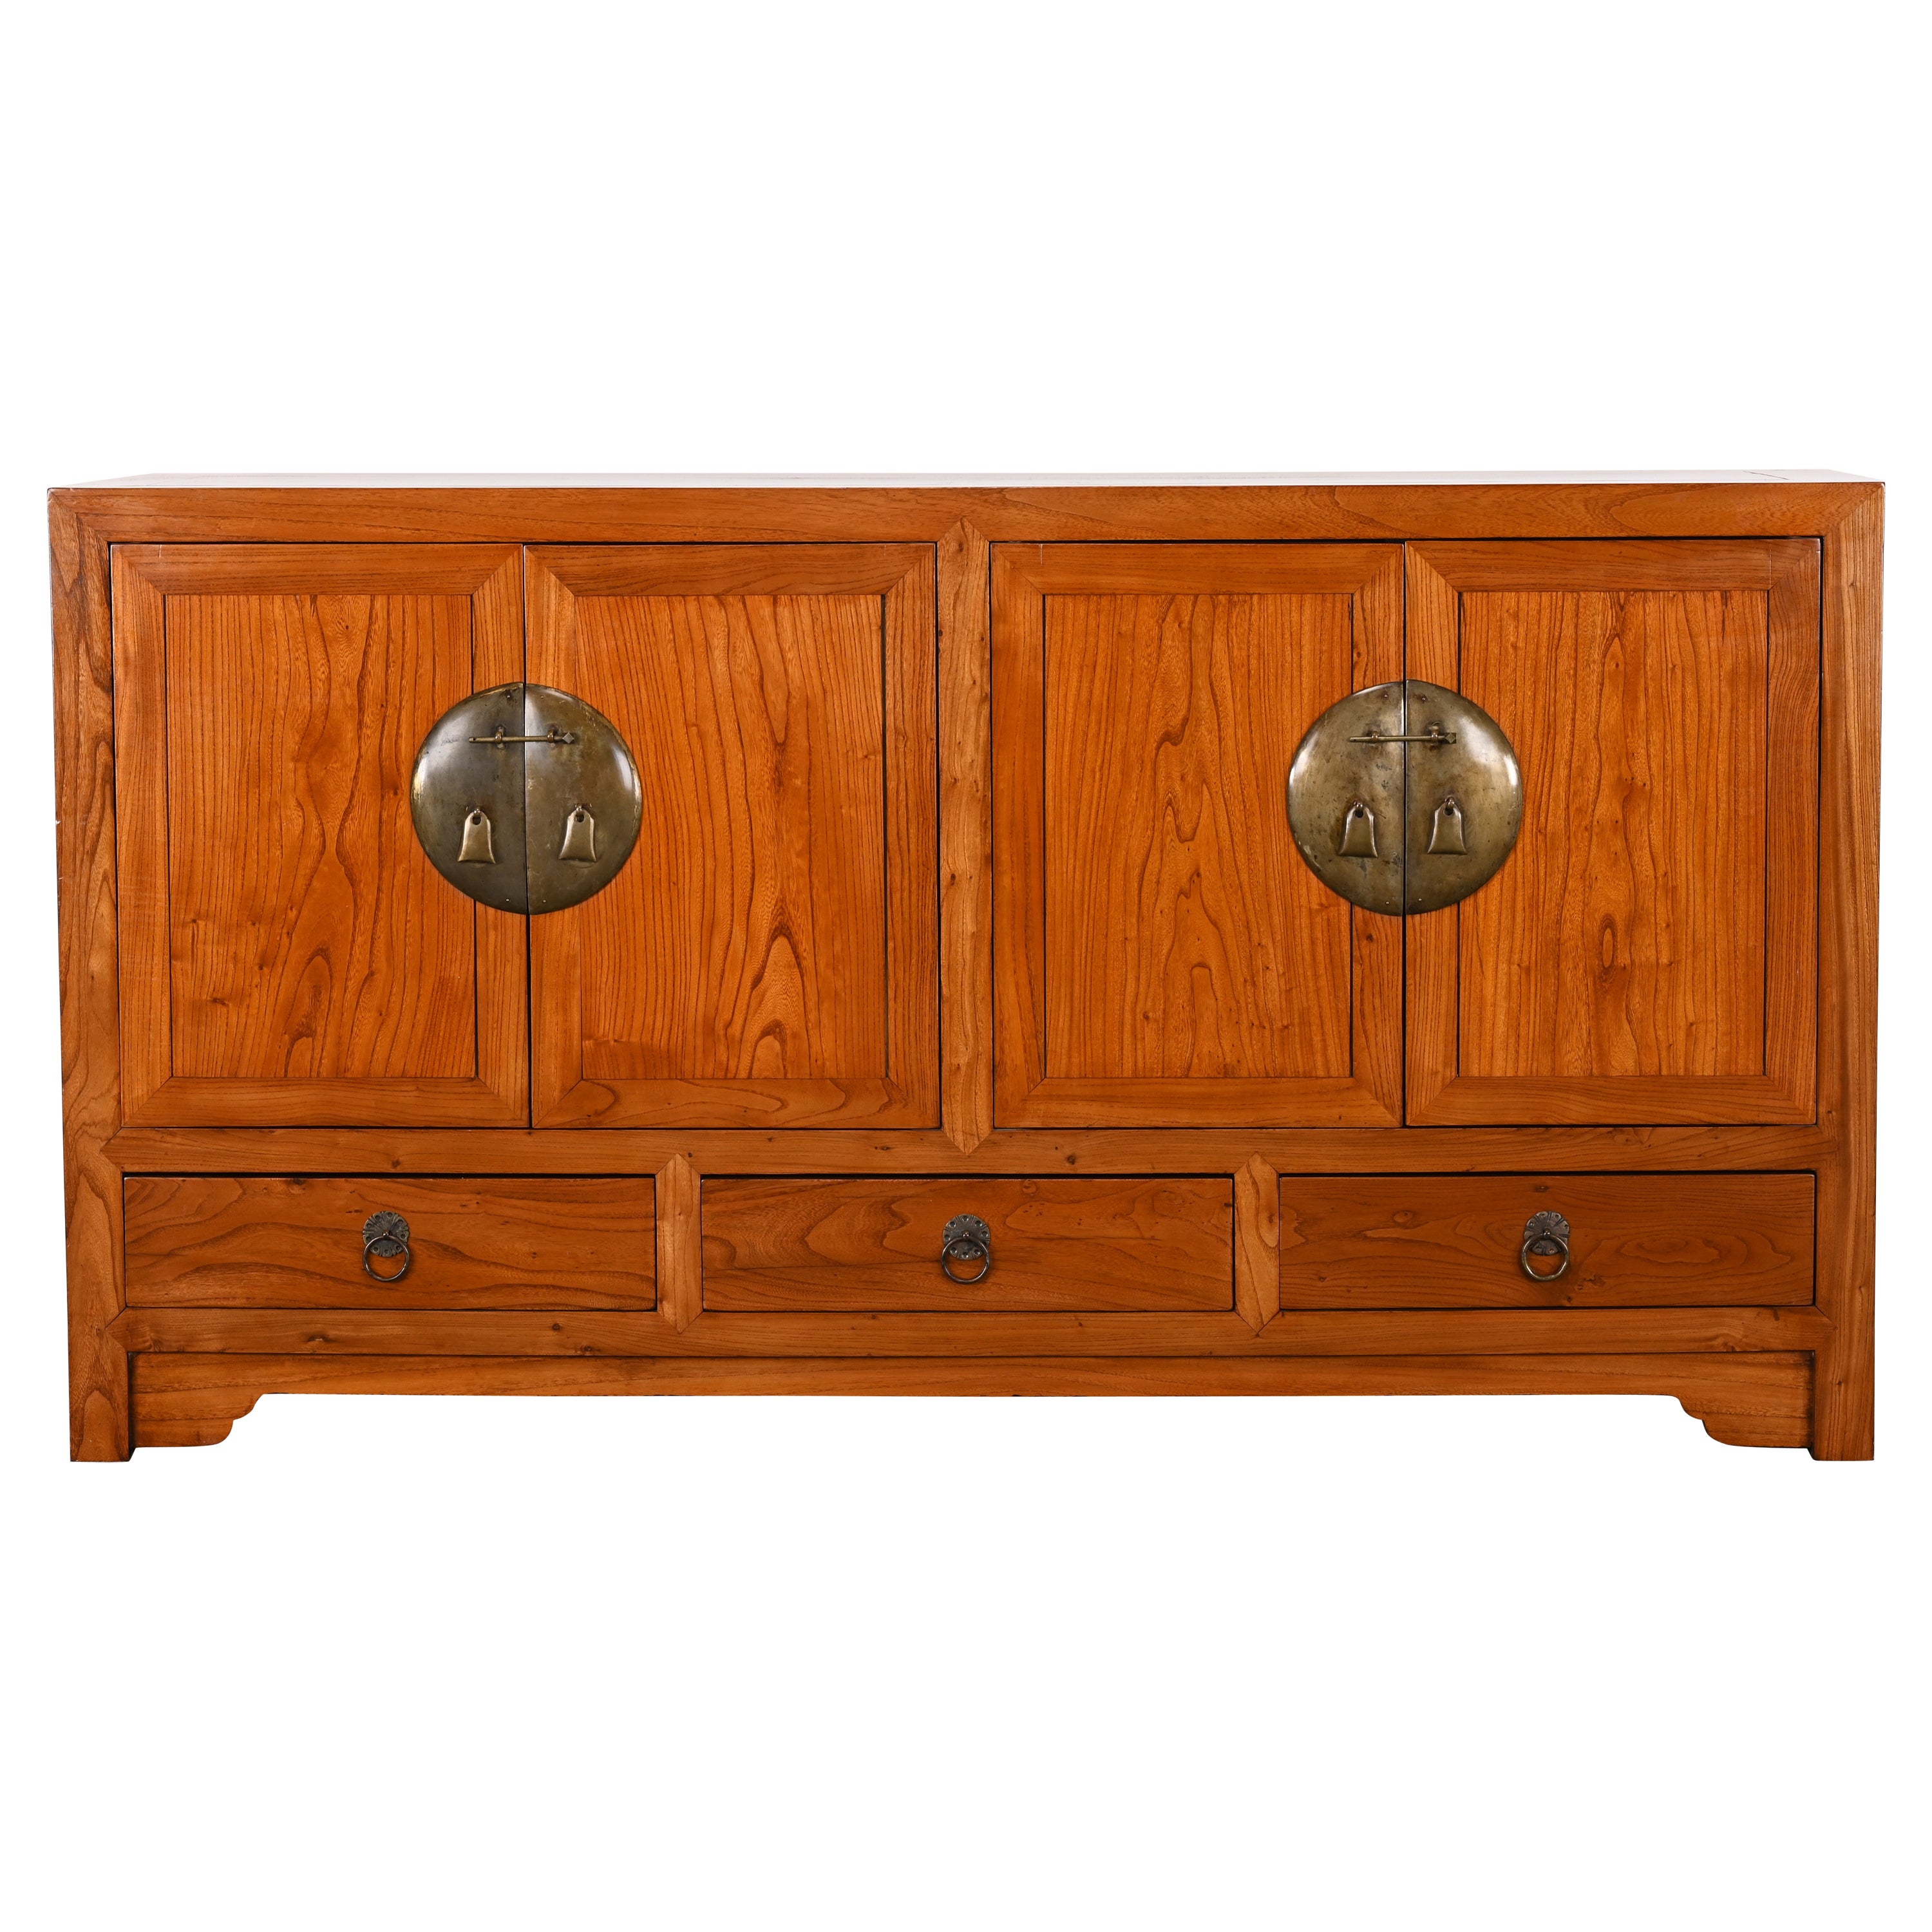 Chinese Elmwood and Brass Credenza or Sideboard, Mid 20th Century